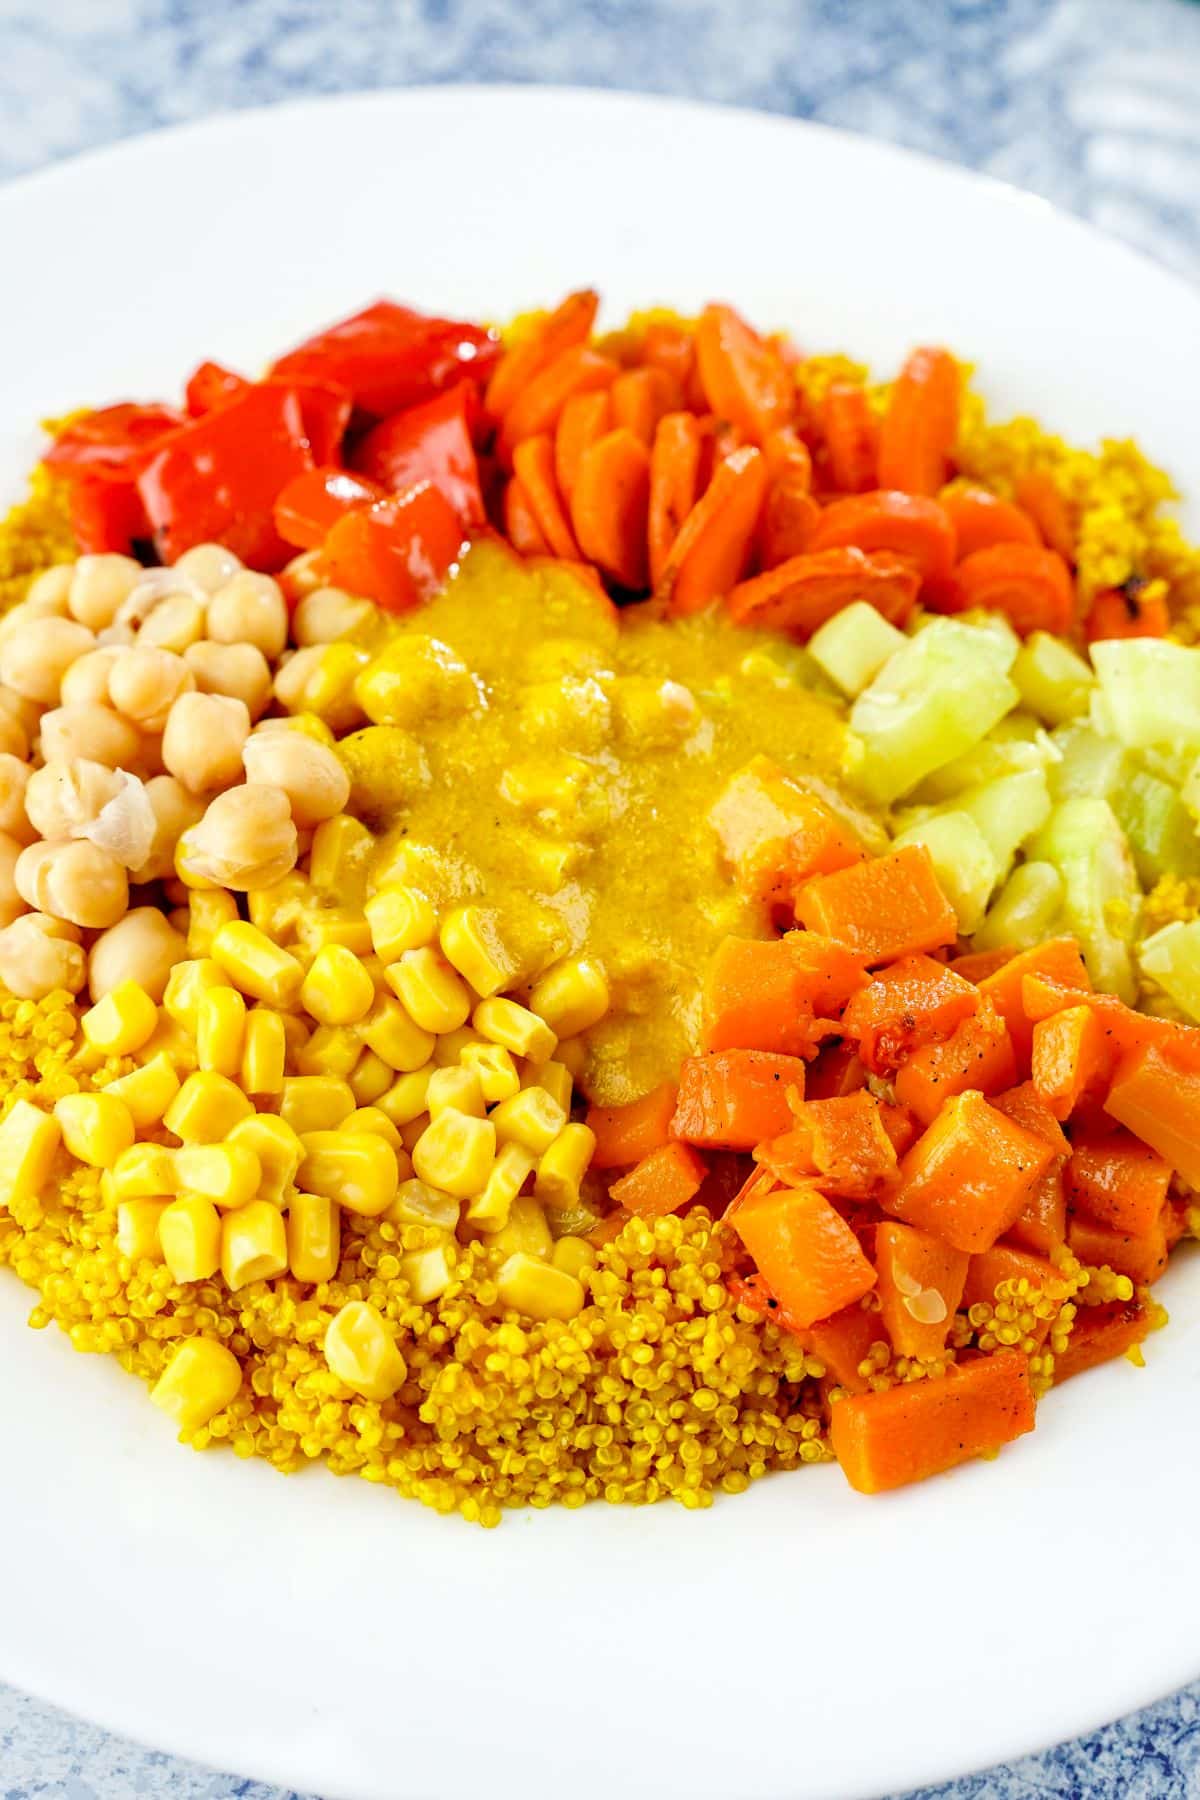 white bowl filled with yellow and orange ingredients including couscous, chickpeas, squash, and more